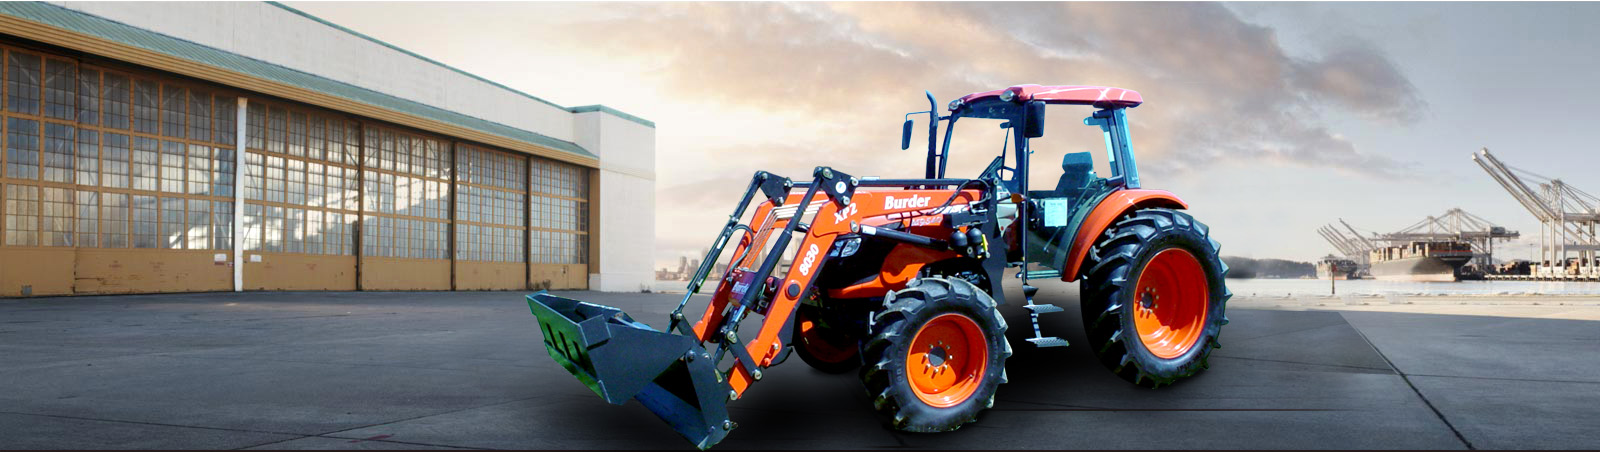 <h2>Burder Industries Pty Ltd</h2> <p>We are proud of our extensive range of agricultural implements and equipment and our long history of manufacturing excellence</p>